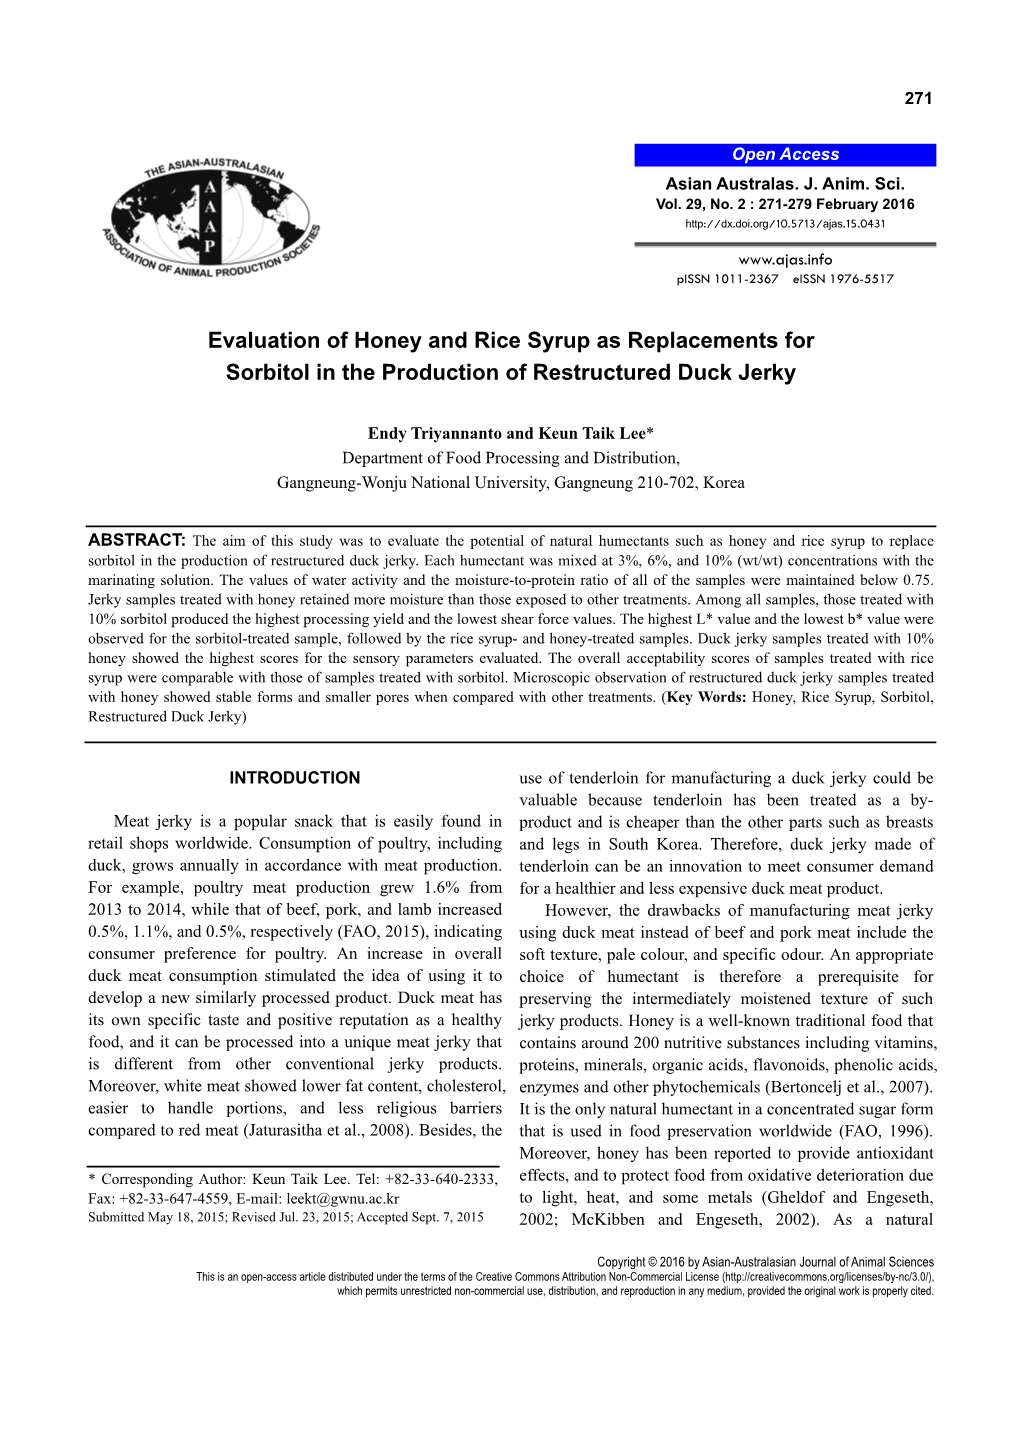 Evaluation of Honey and Rice Syrup As Replacements for Sorbitol in the Production of Restructured Duck Jerky